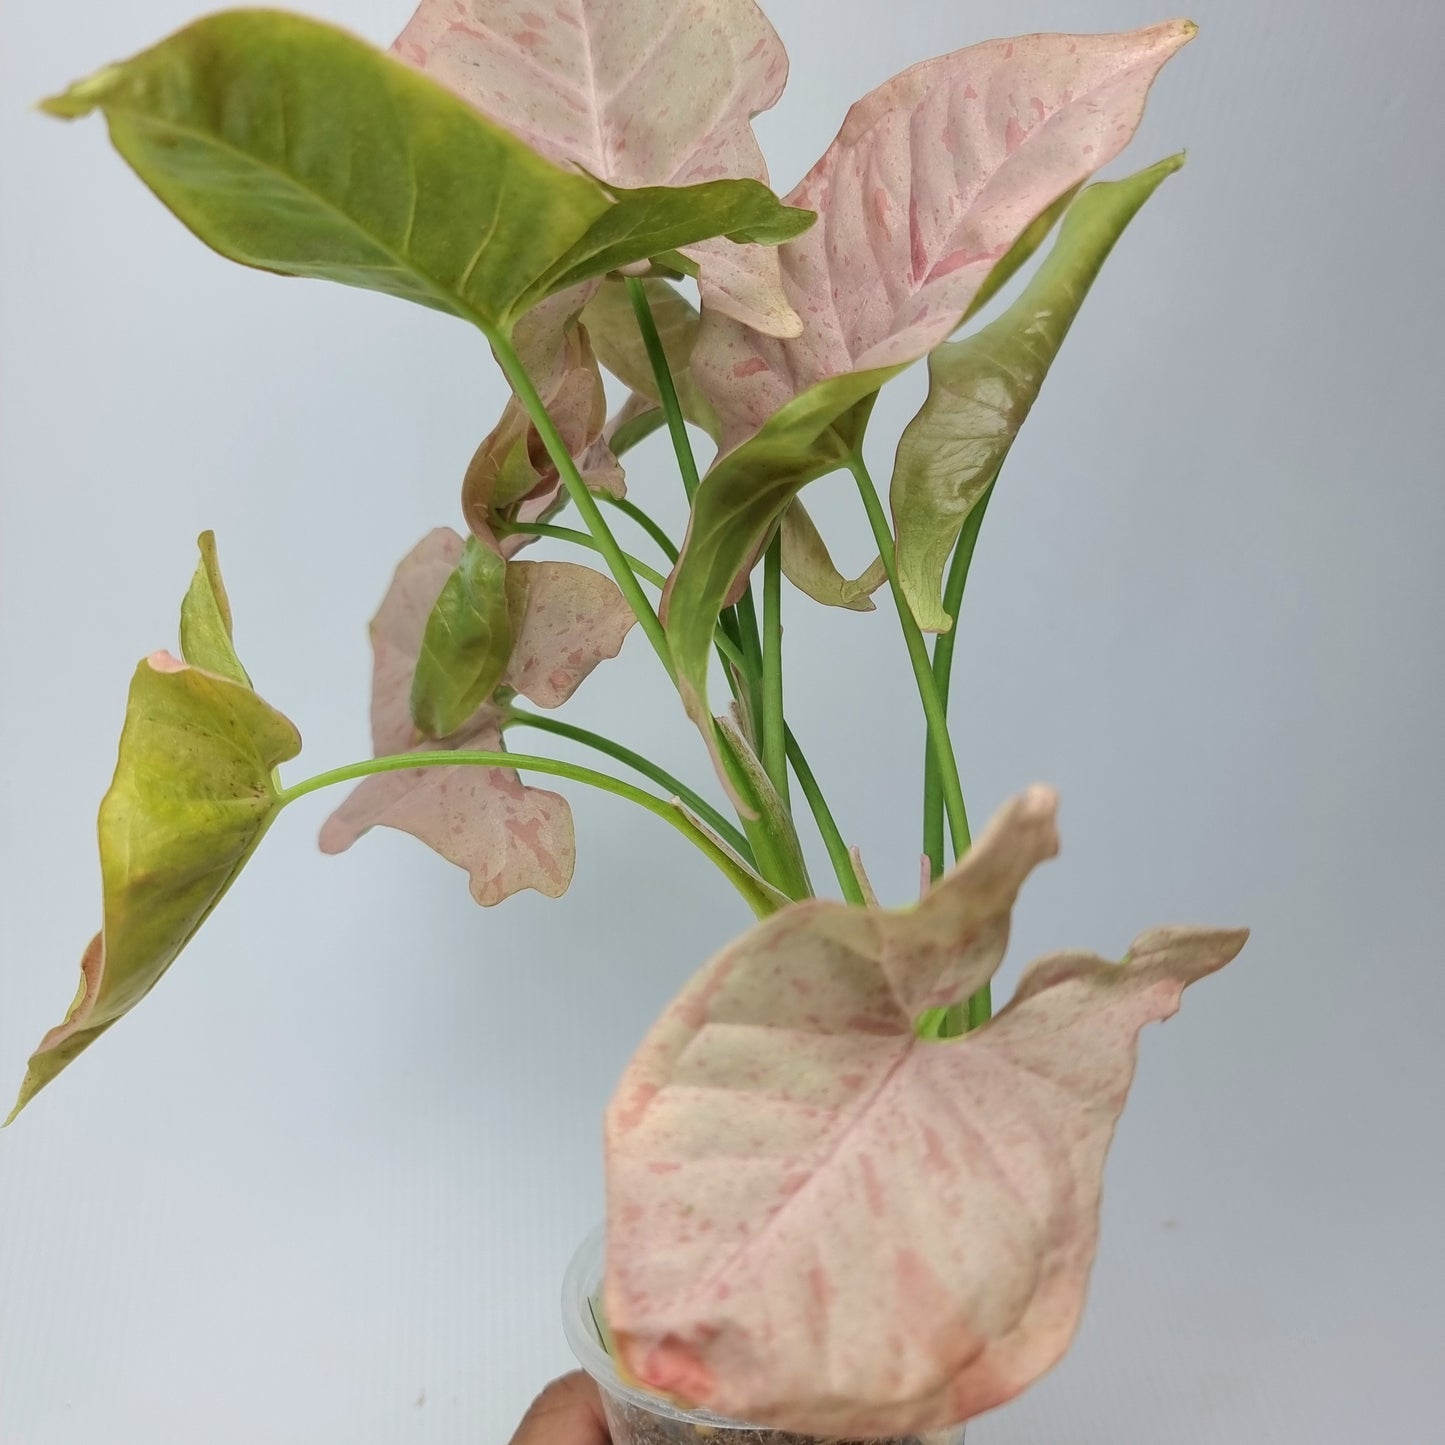 rare collectible Syngonium Pink Spot for sale in Perth Australia